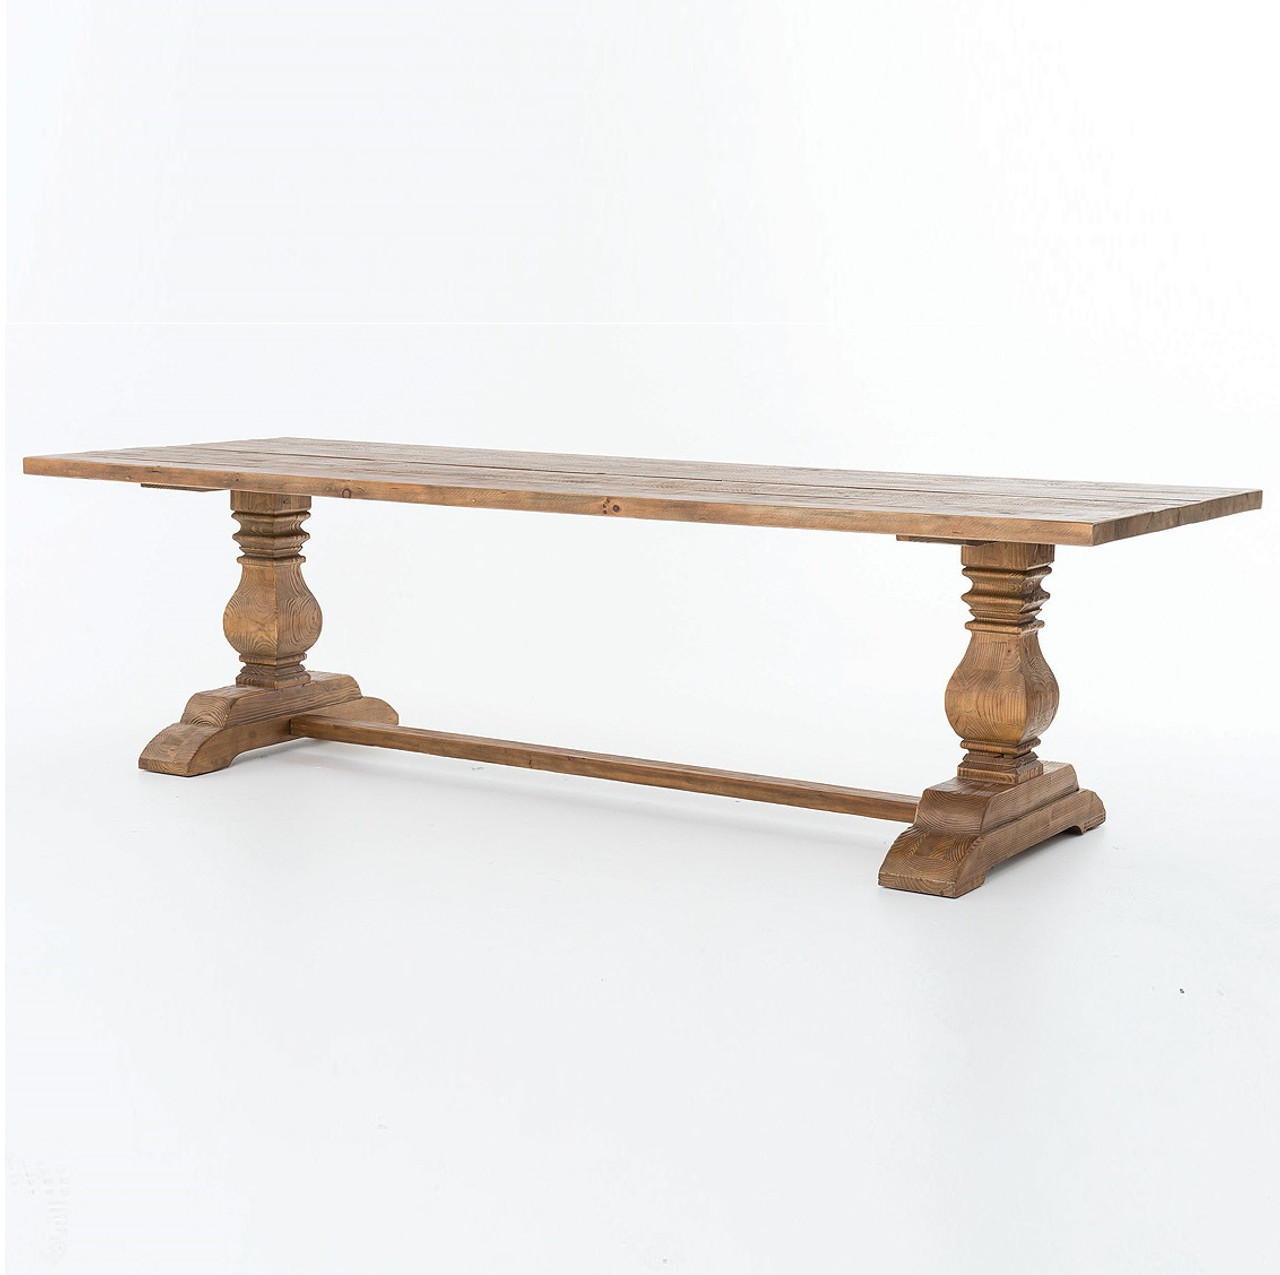 Natural Rustic Reclaimed Wood Trestle Dining Table 110 Zin Home